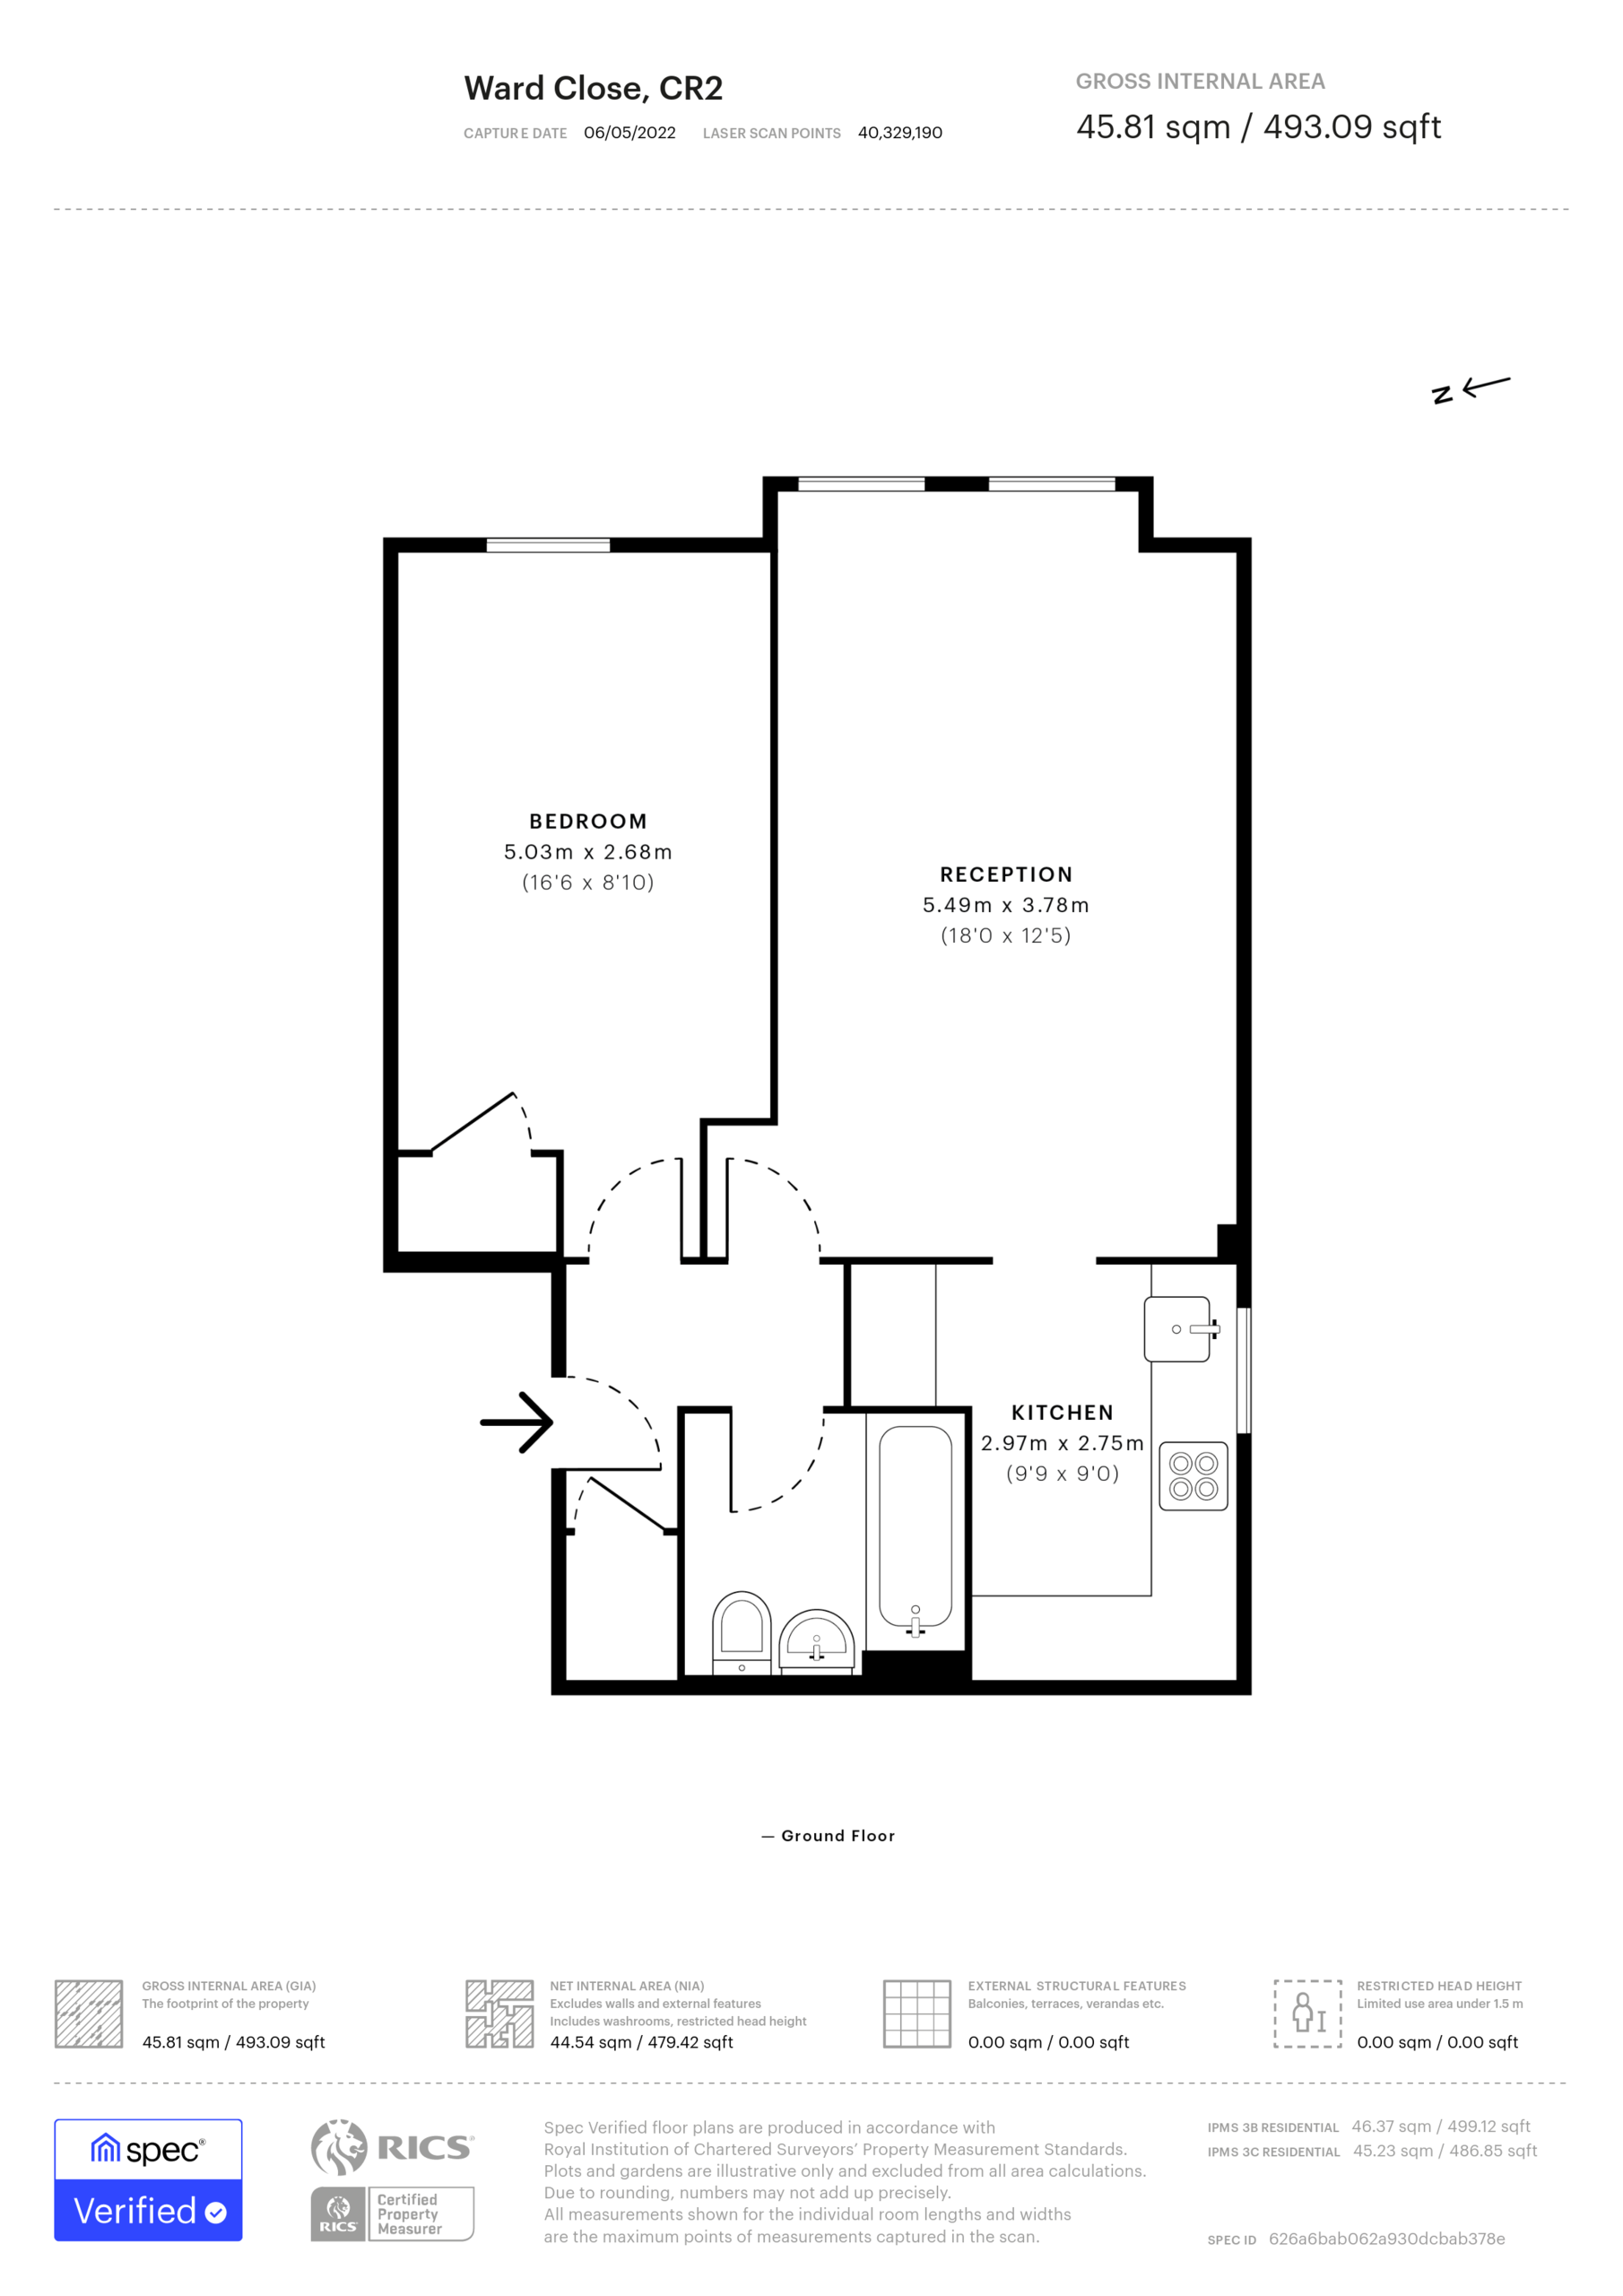 1 bed apartment for sale in 2 Ward Close, South Croydon - Property floorplan